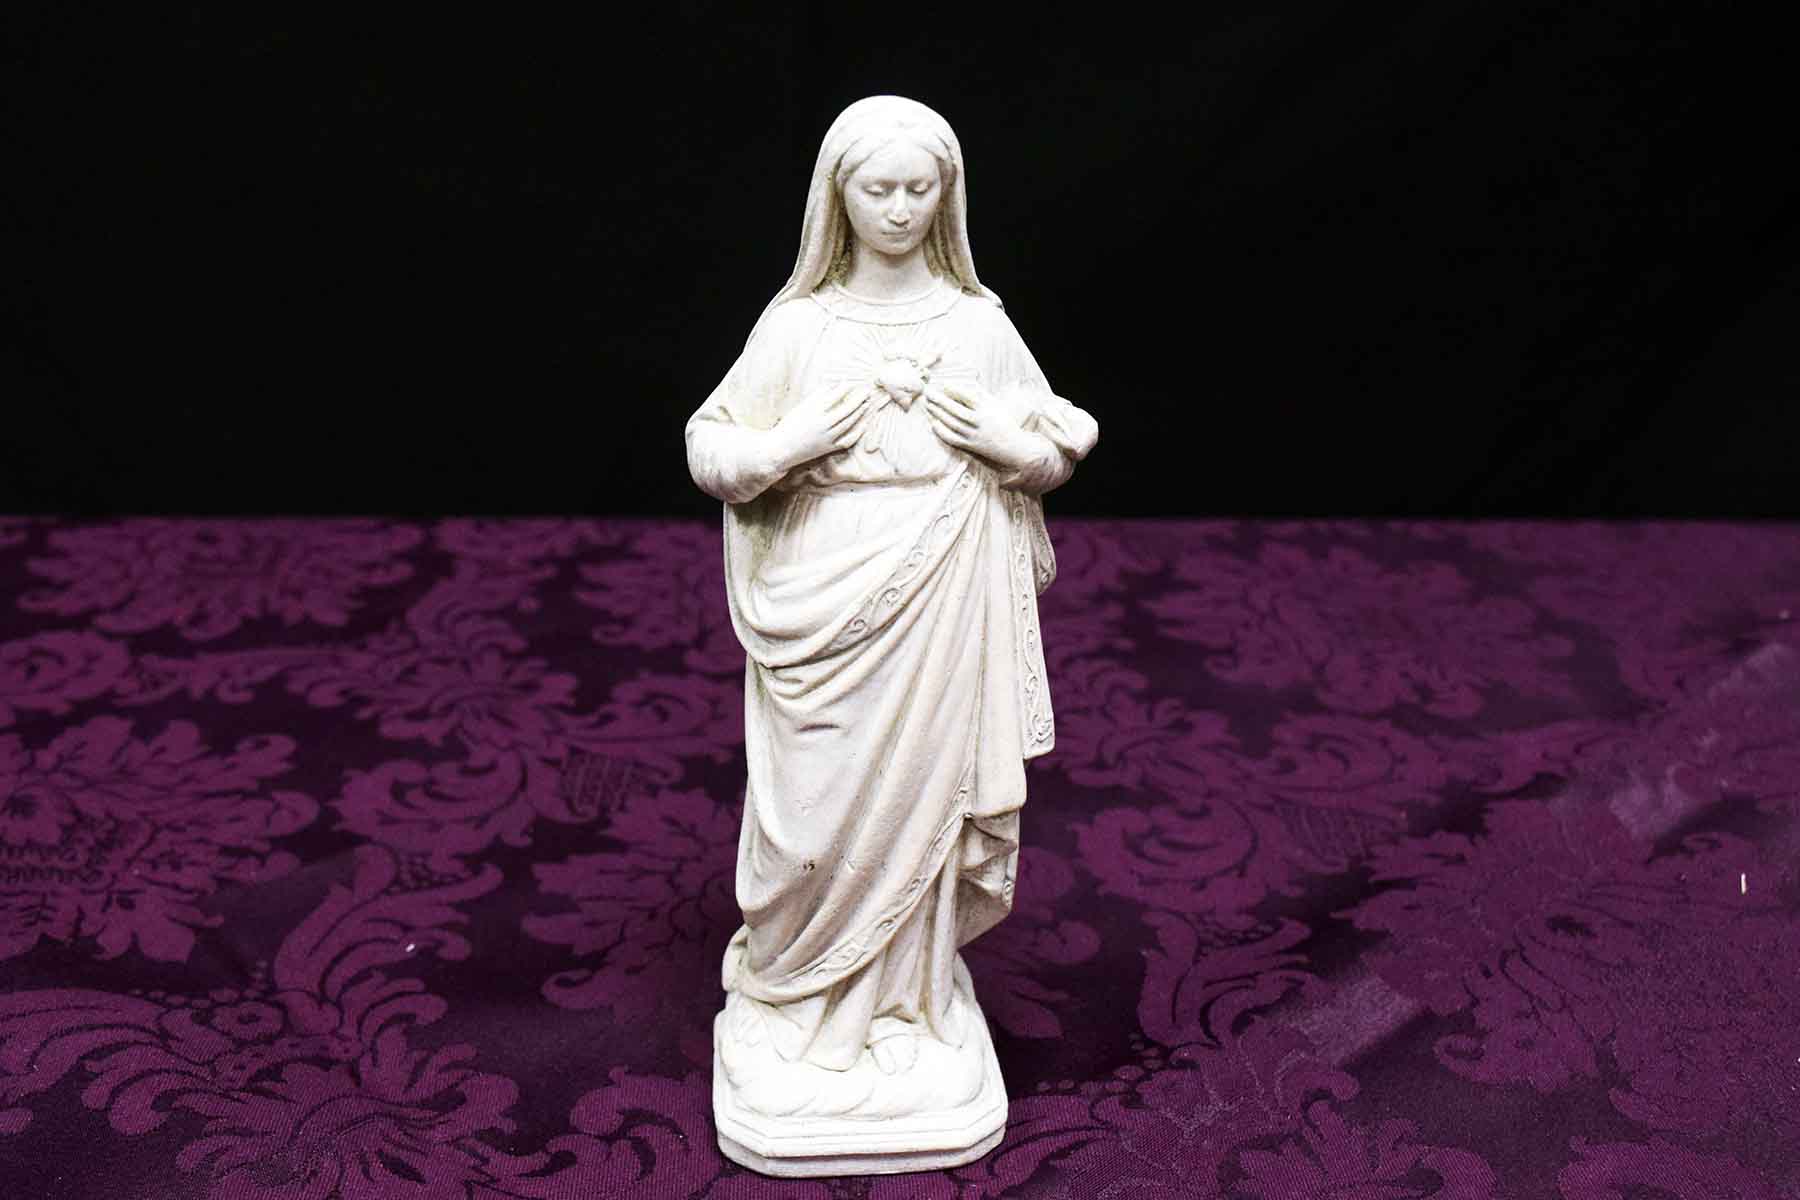 R11_Immaculate_Heart_of_Mary_statue_-_CCMLpic-R.jpg